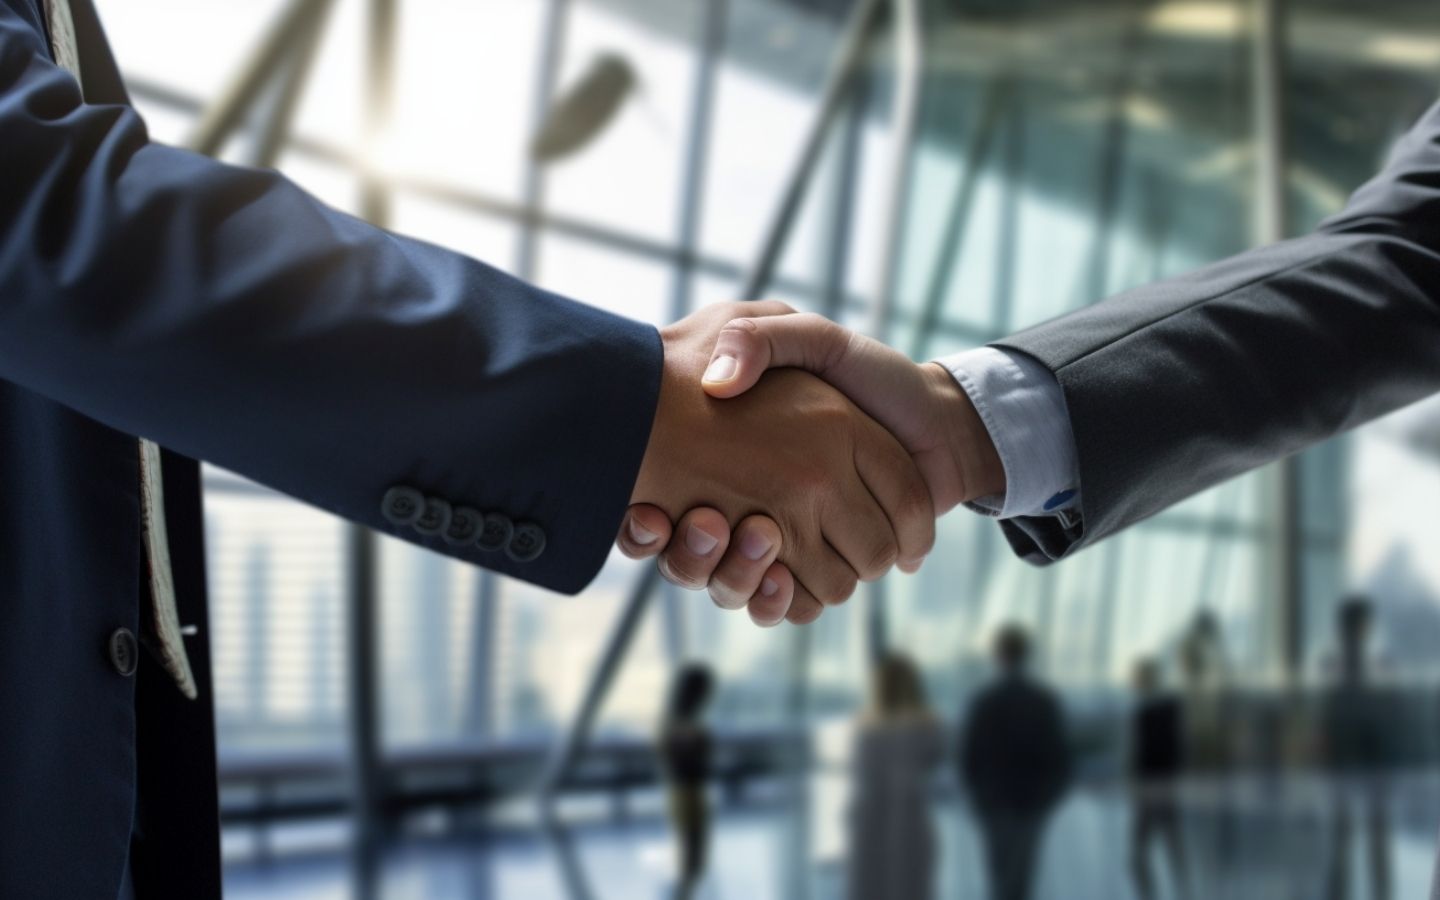 Architects and real estate experts shaking hands